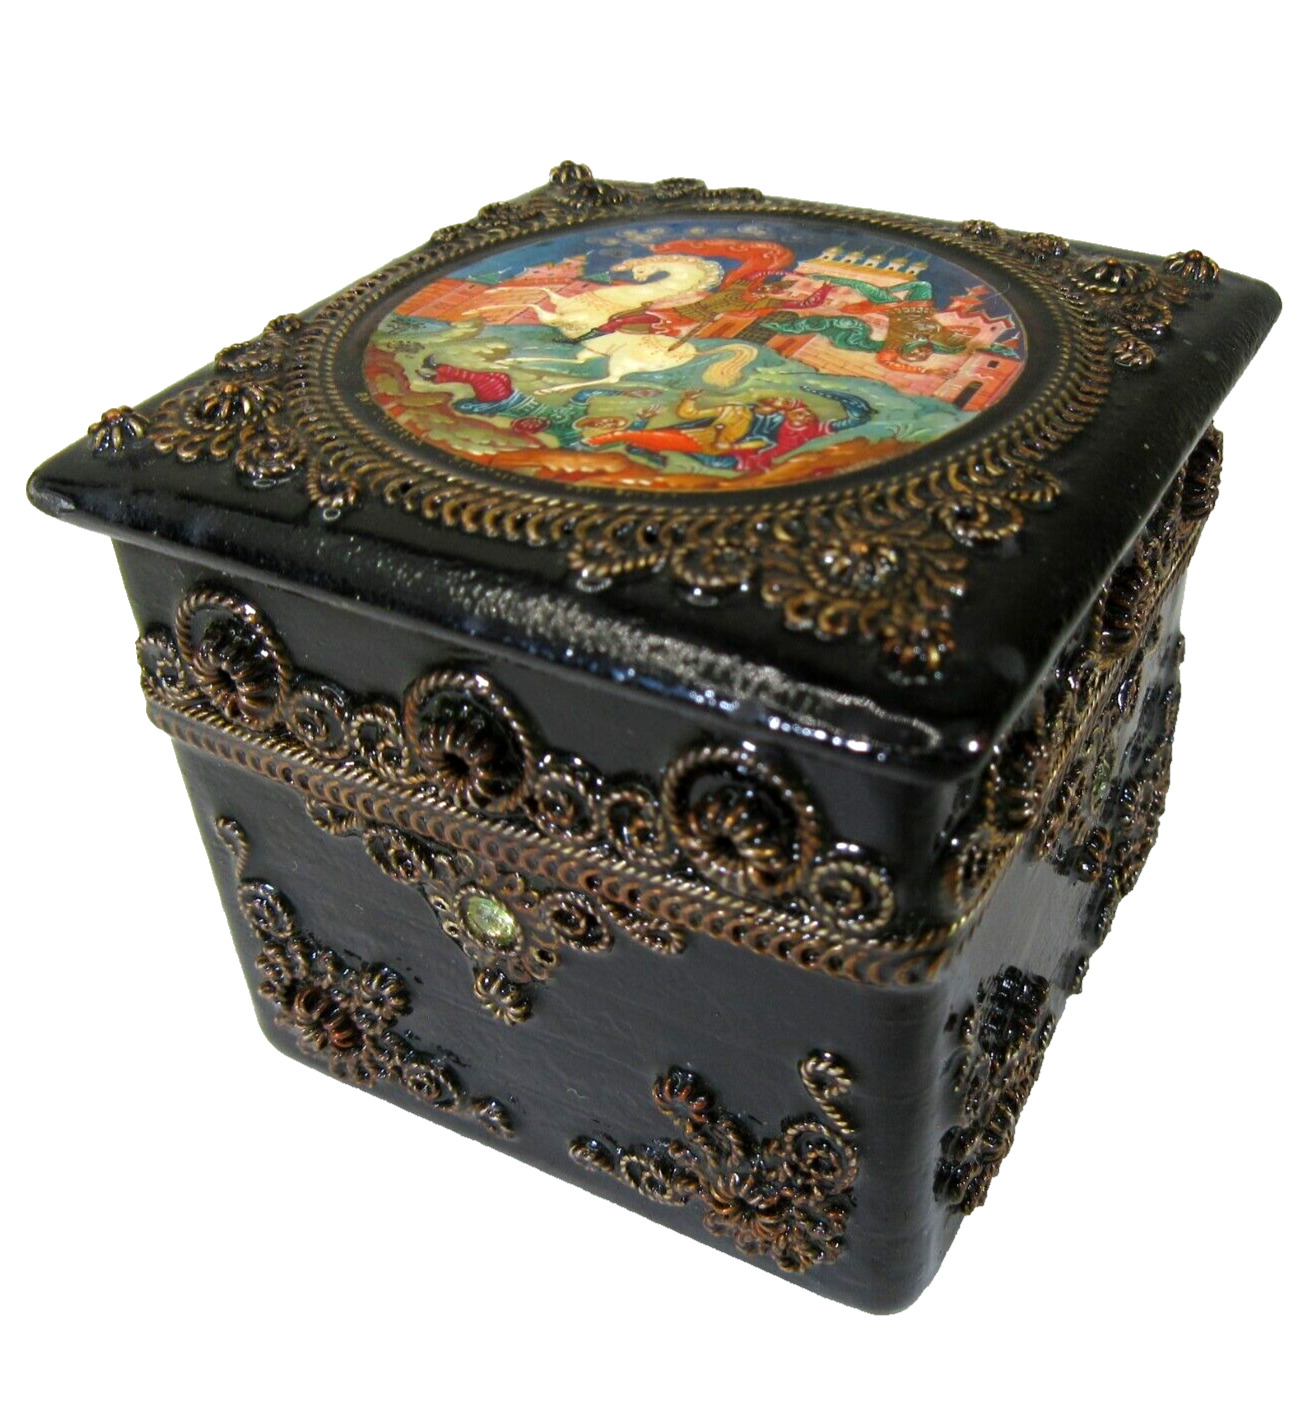 Russian Palekh black lacquer trinket box jeweled hand painted miniature signed